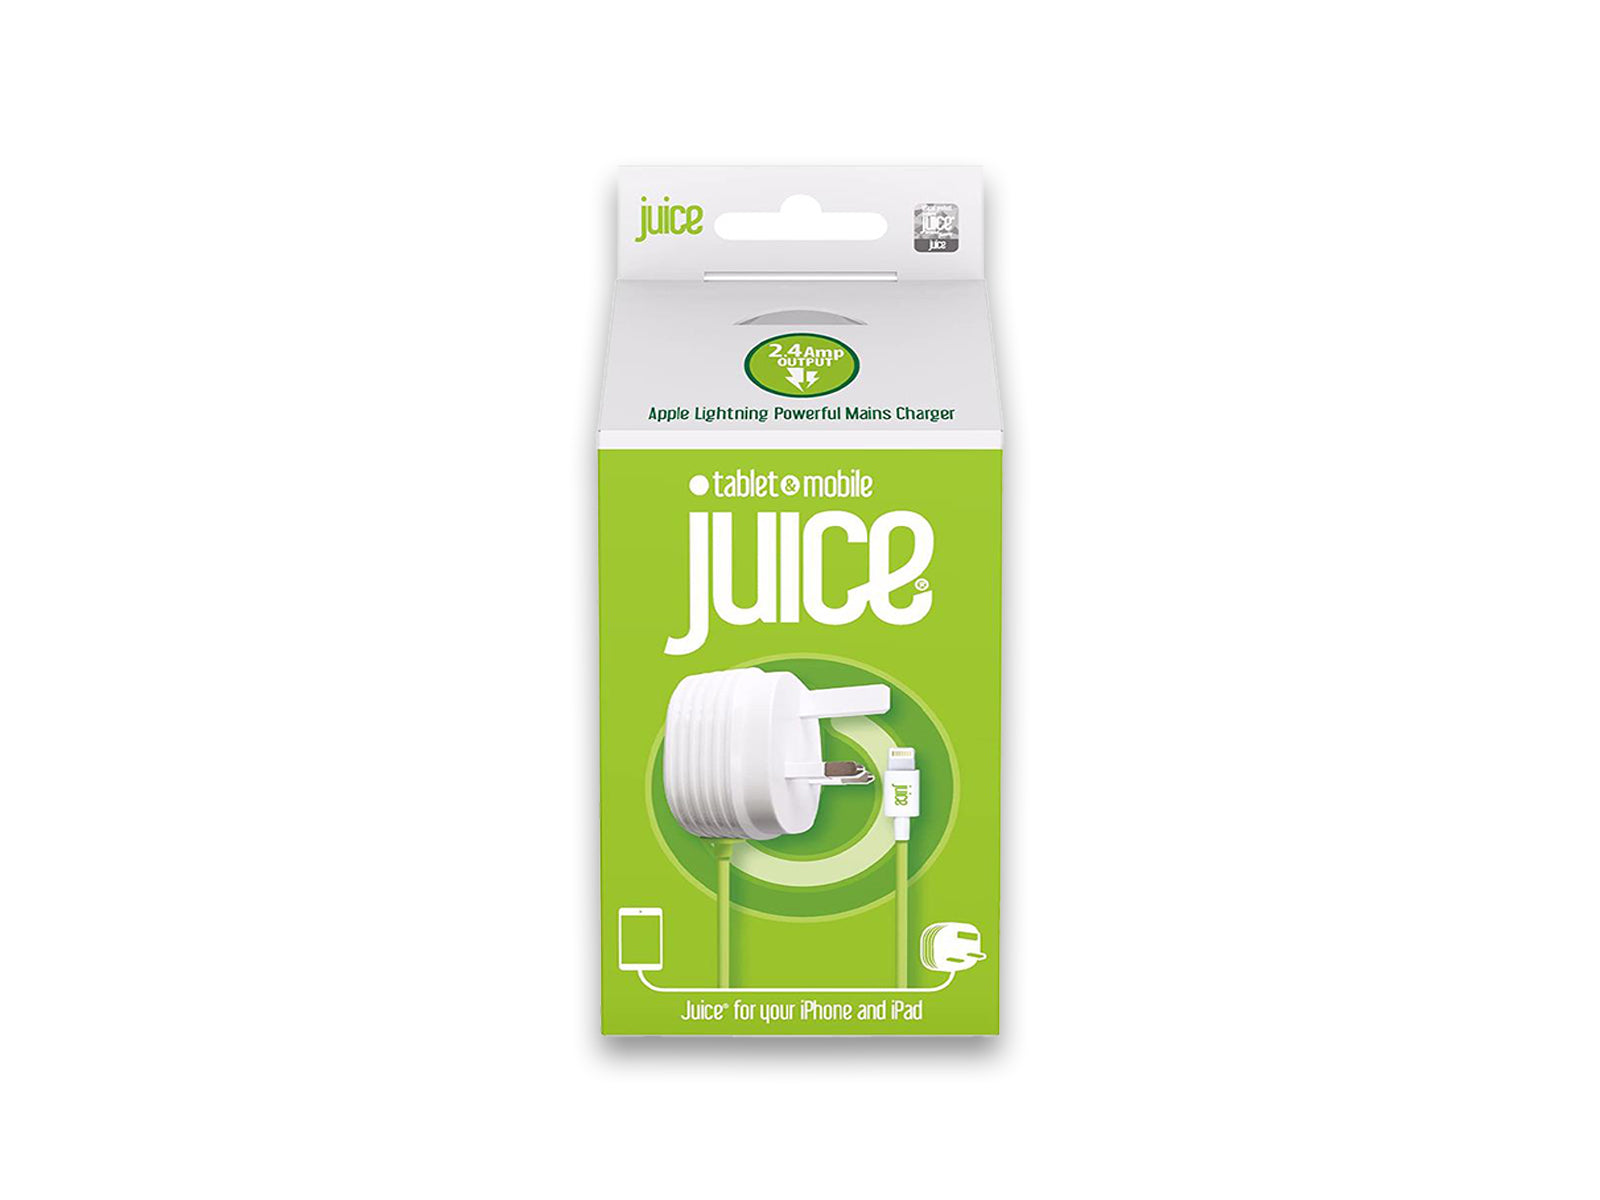 Lightning Mains Charger Juice Box Front